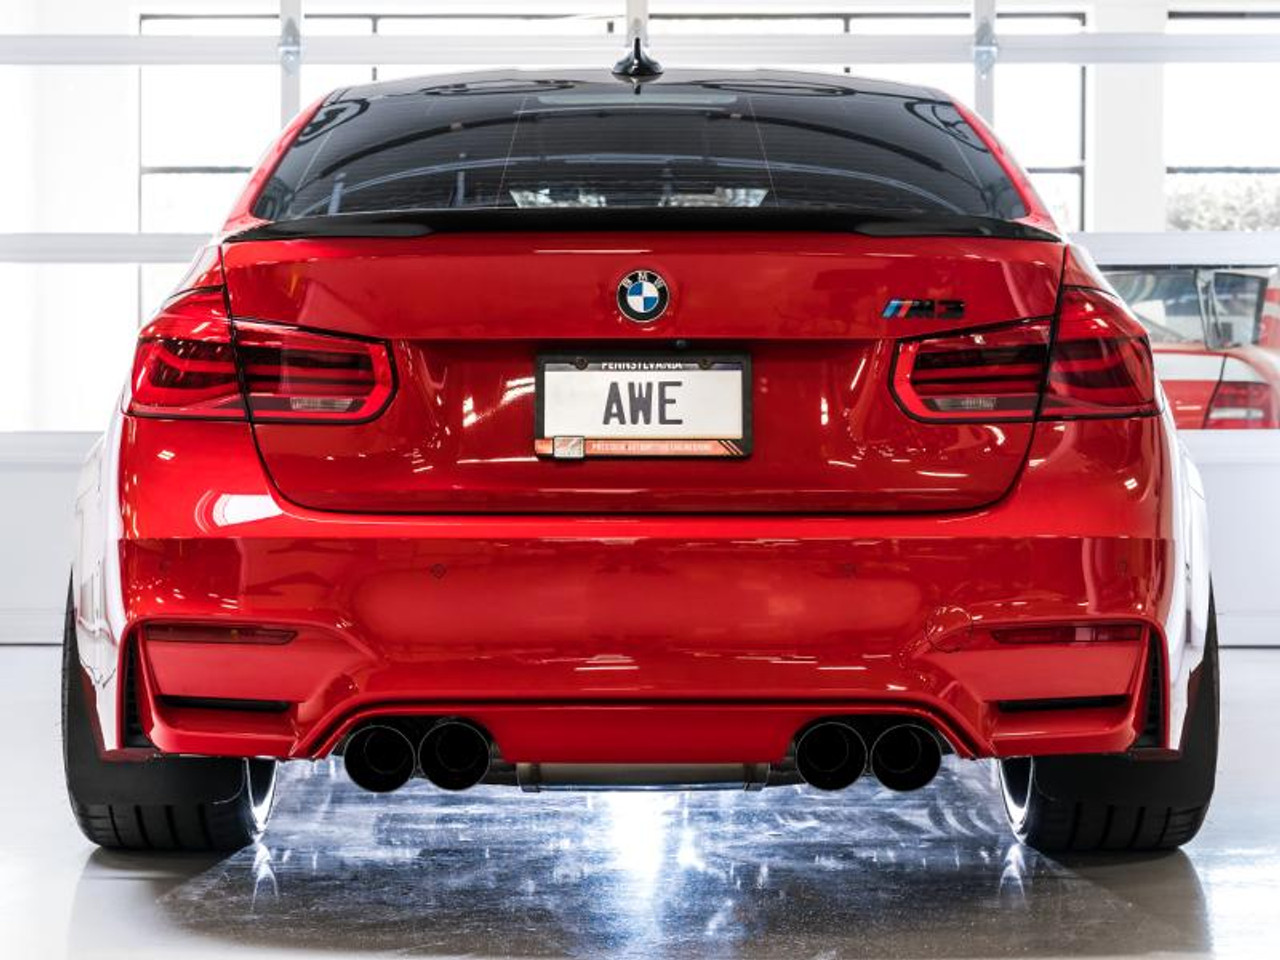 Awe Tuning AWE Tuning BMW F8X M3/M4 Track Edition Catback Exhaust - Chrome Silver Tips - 3020-42082